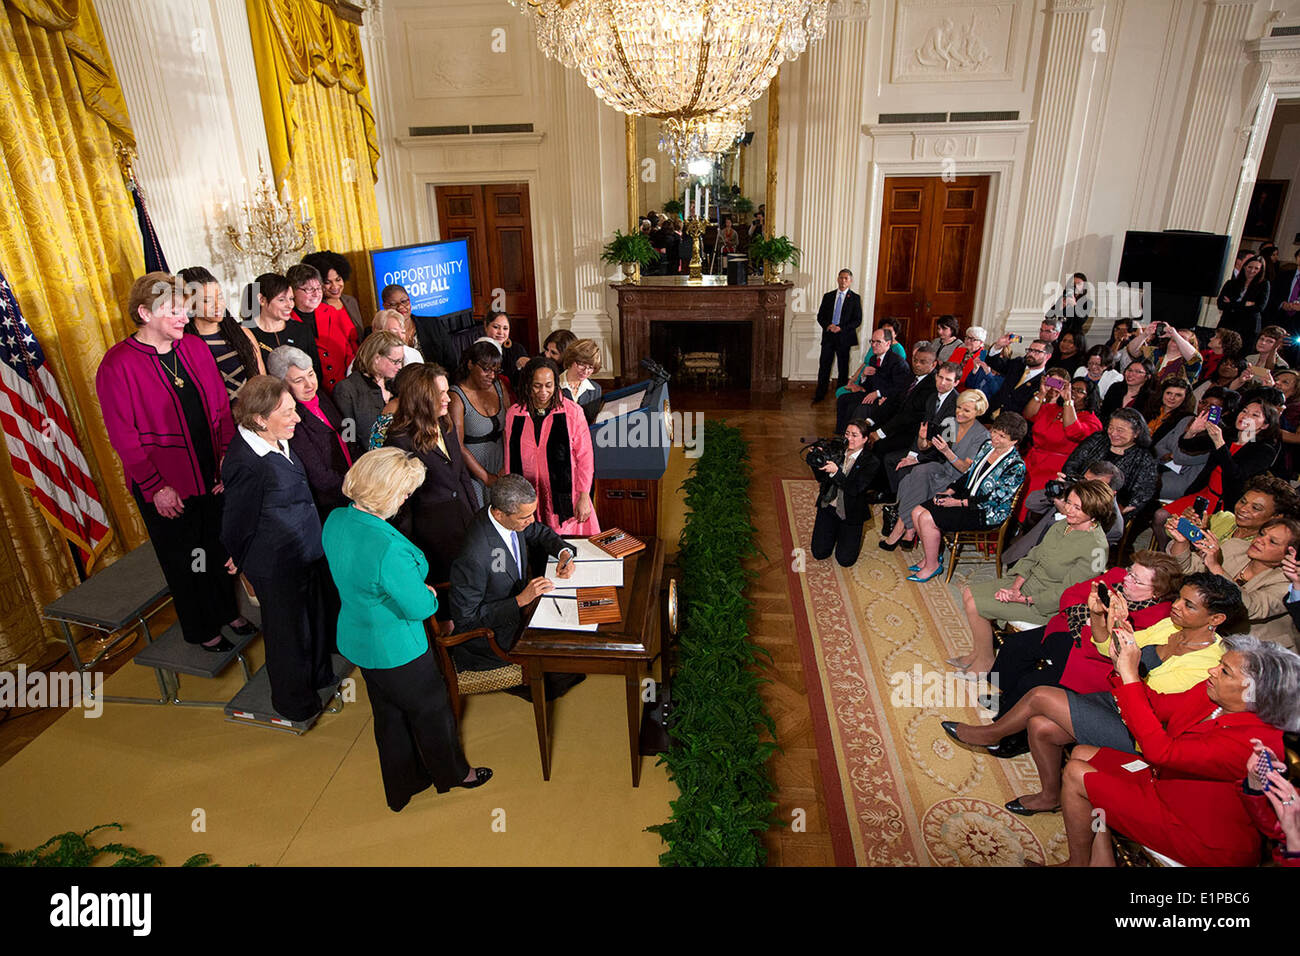 US President Barack Obama signs executive actions to strengthen enforcement of equal pay laws for women, at an event marking Equal Pay Day in the East Room of the White House April 8, 2014 in Washington, DC. The President signs the Presidential Memorandum -- Advancing Pay Equality Through Compensation Data Collection, and an Executive Order regarding Non-Retaliation for Disclosure of Compensation Information. Lilly Ledbetter stands to the left of the signing table. Stock Photo